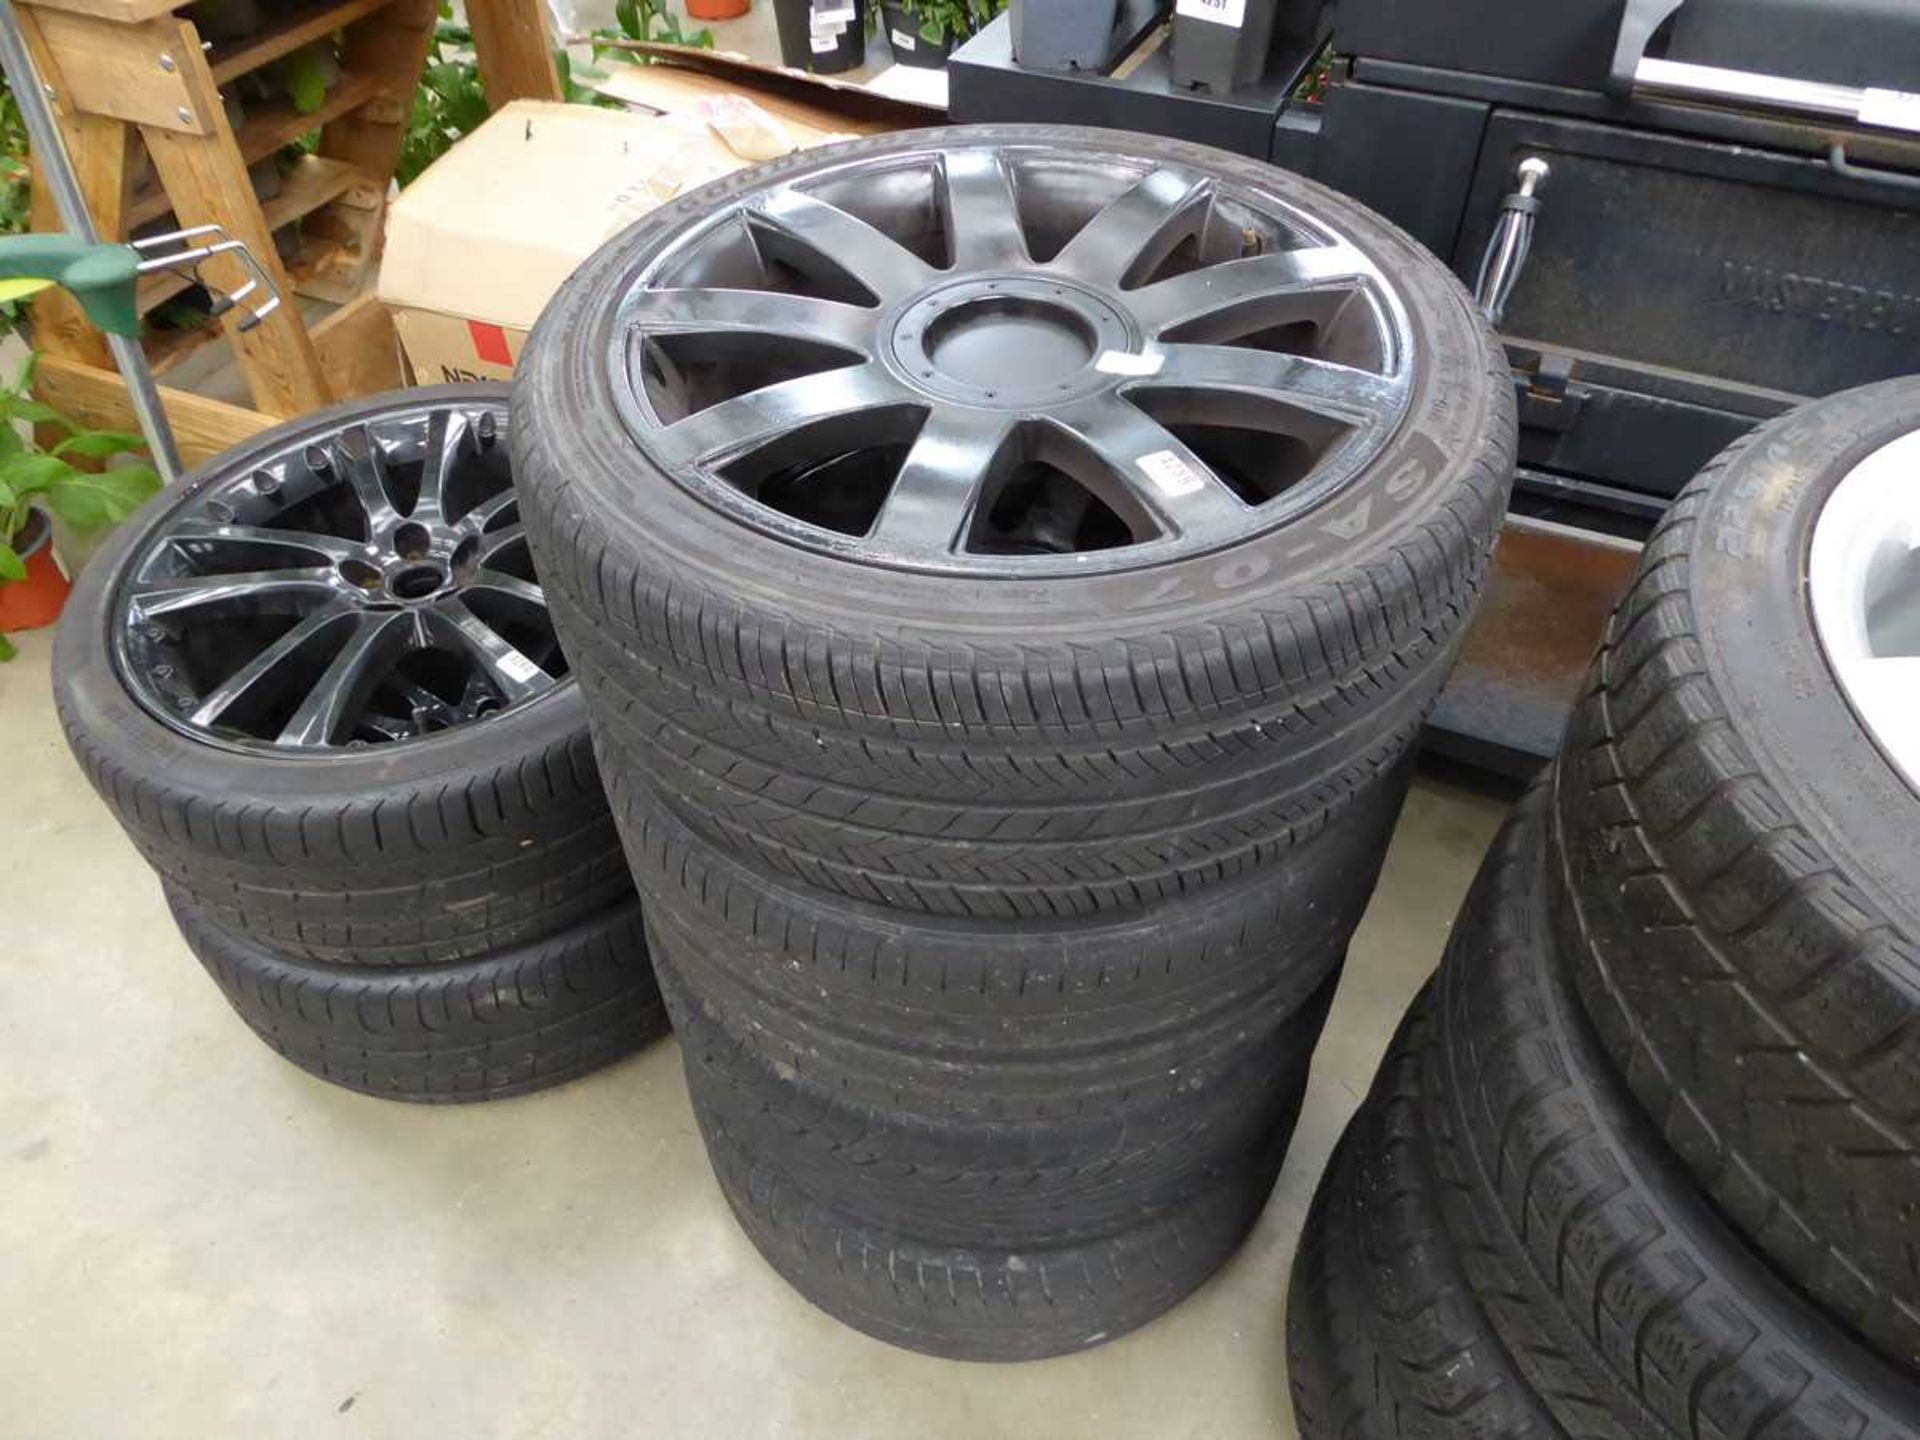 4 x Audi black allot wheels and tyres, size 225x40x18